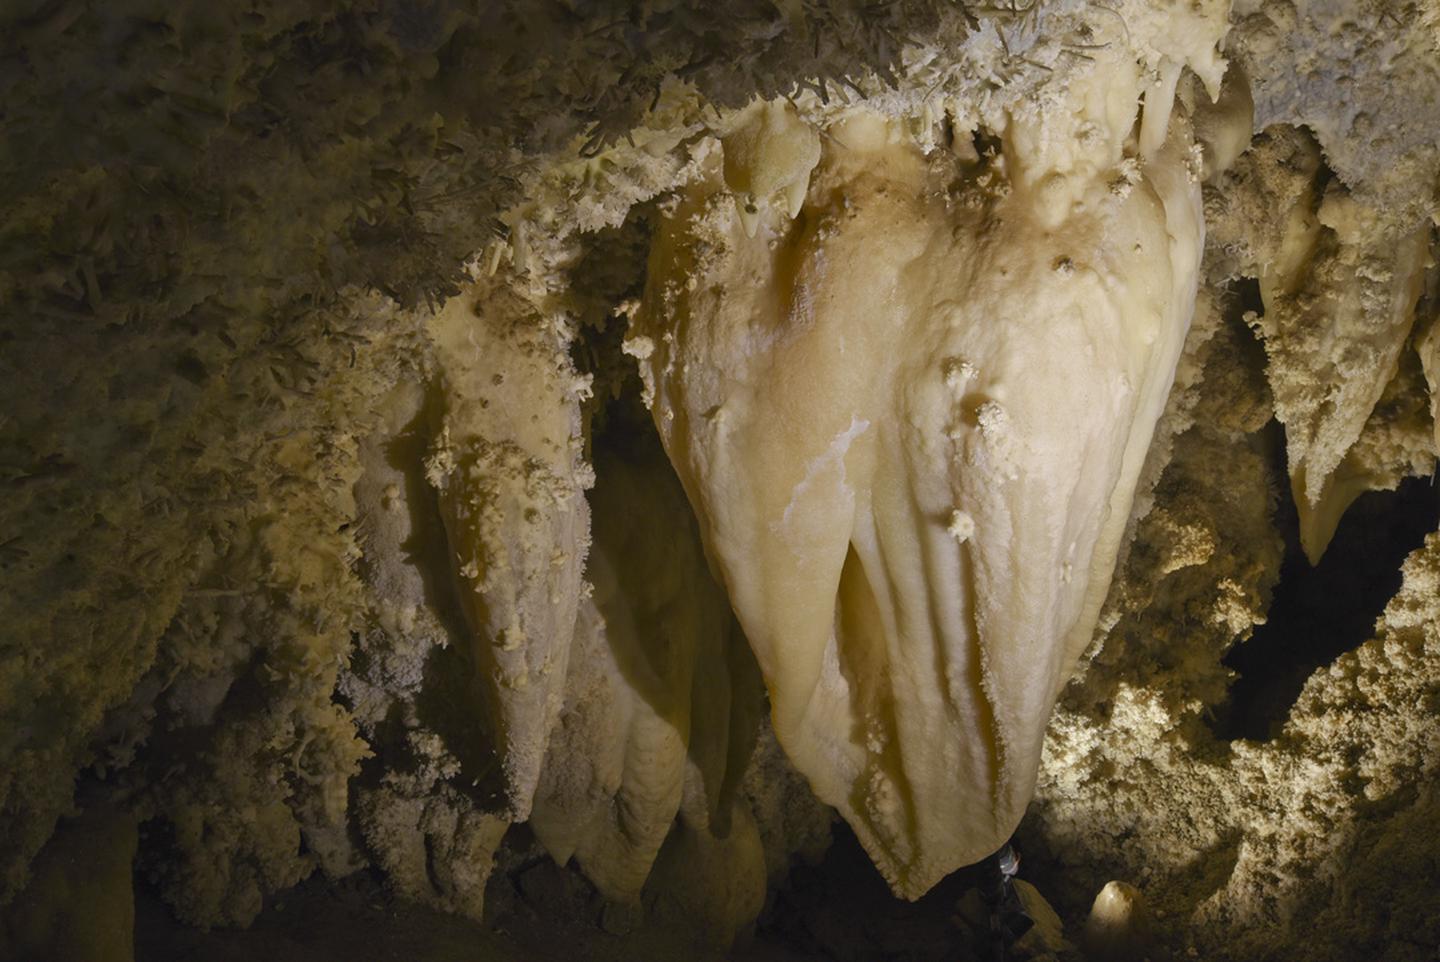 Two ton white stalactite surrounded by smaller formationsHeart of Timpanogos